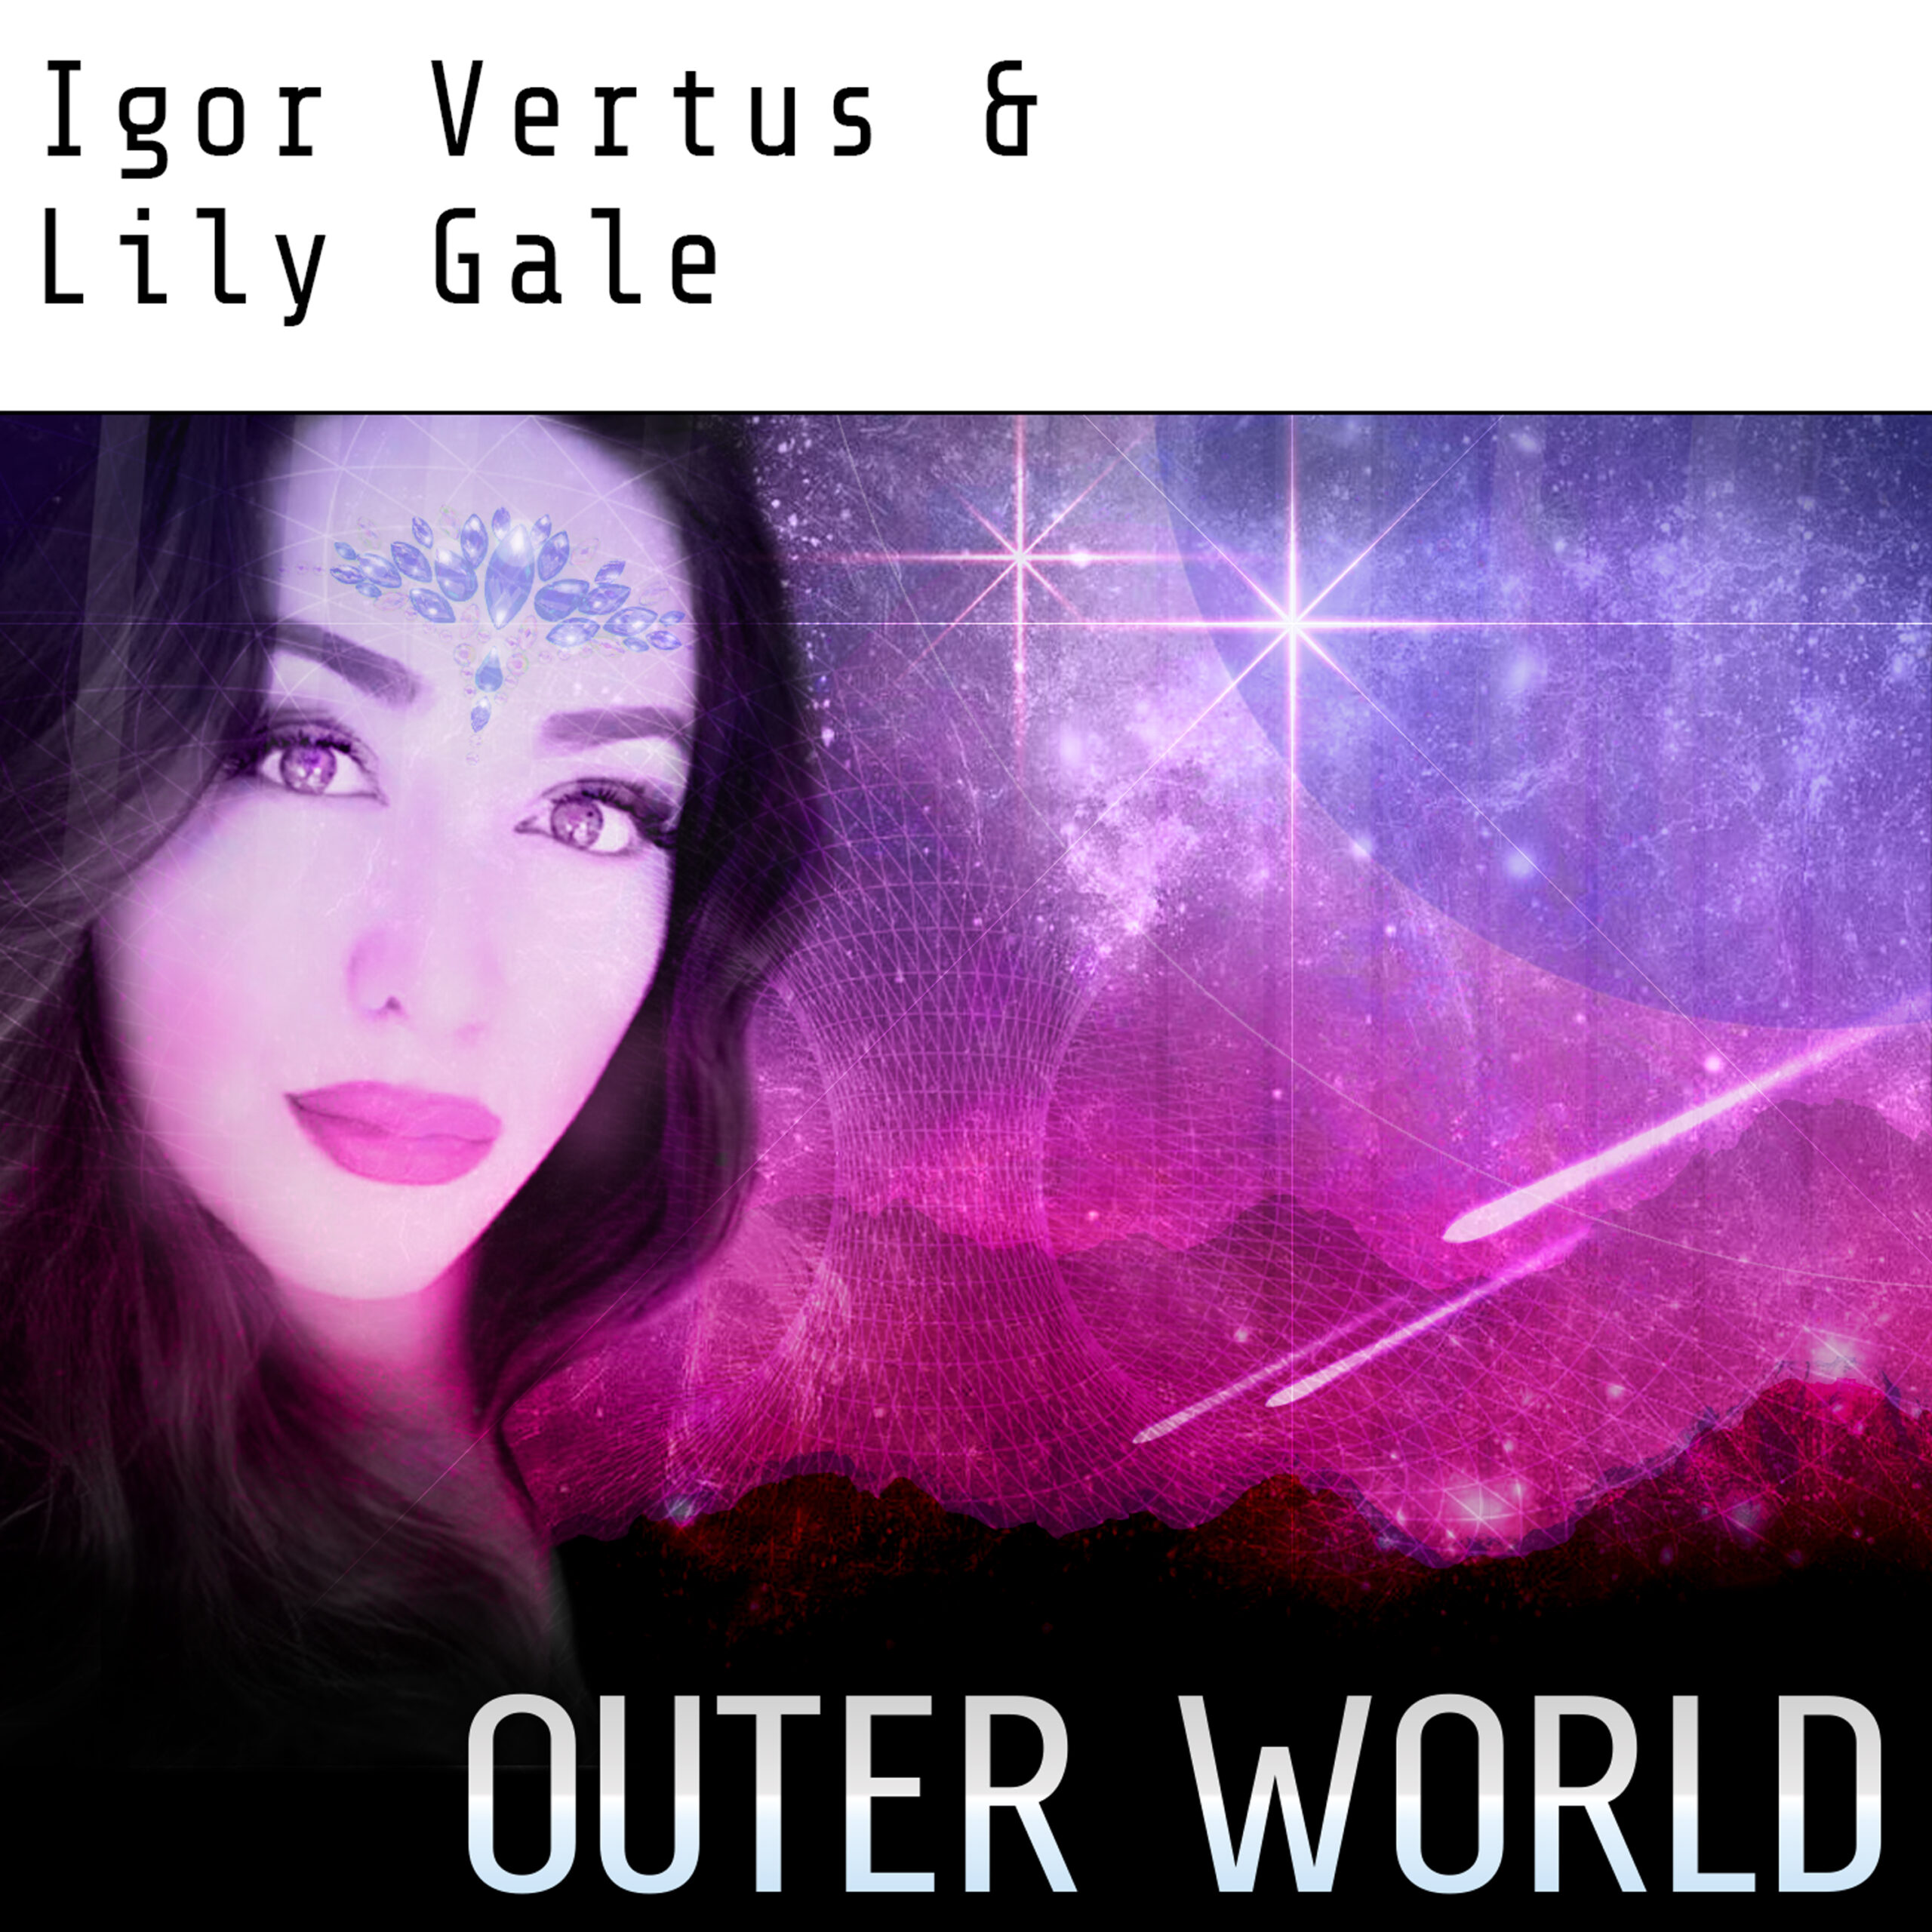 Igor Vertus & Lily Gale - Outer World - techno